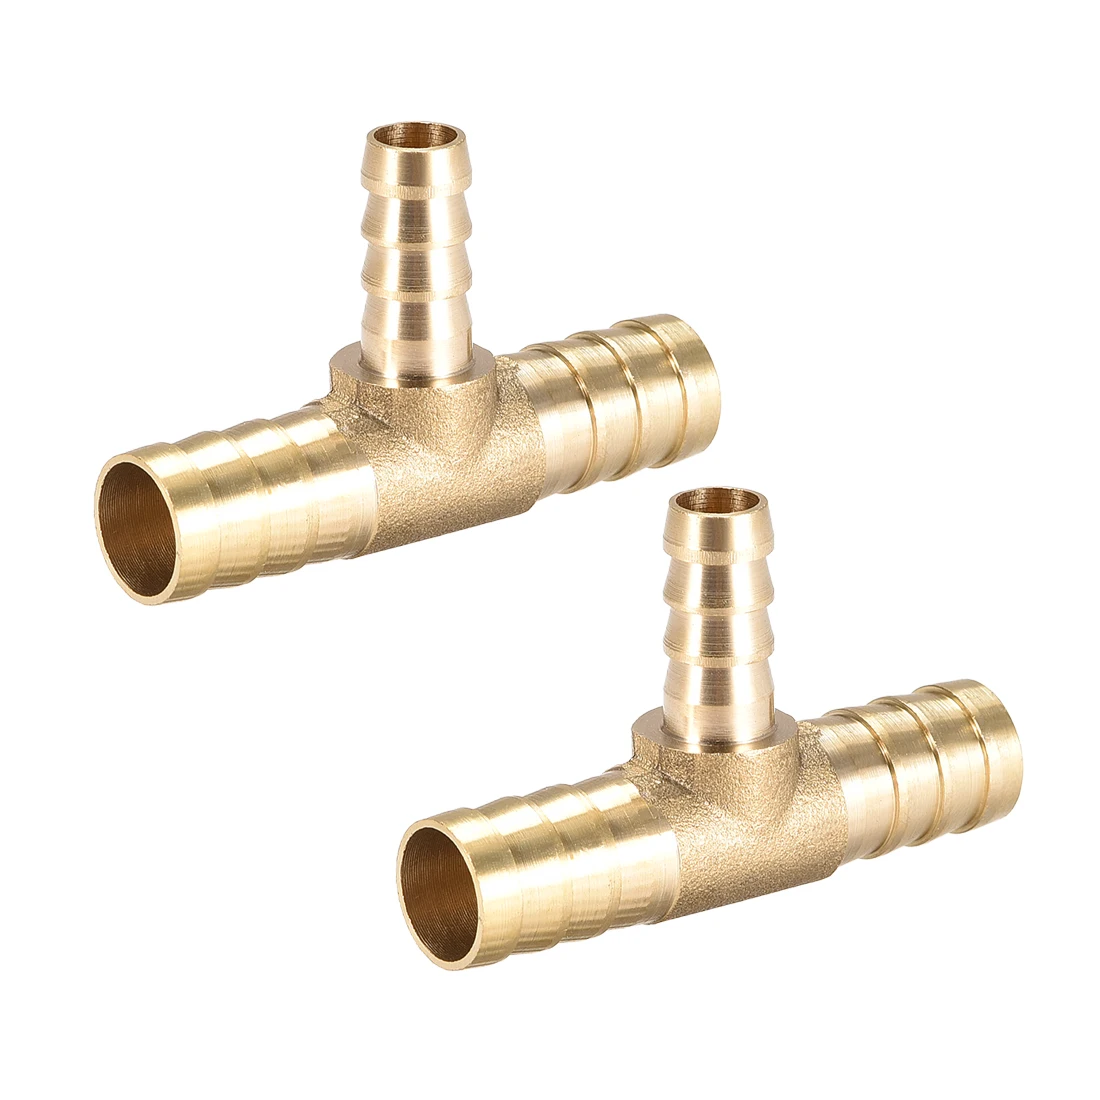 

uxcell 2pcs 12X8X12mm Brass Hose Reducer Barb Fitting Tee T-Shaped 3 Way Barbed Connector Air Water Fuel Gas for air water